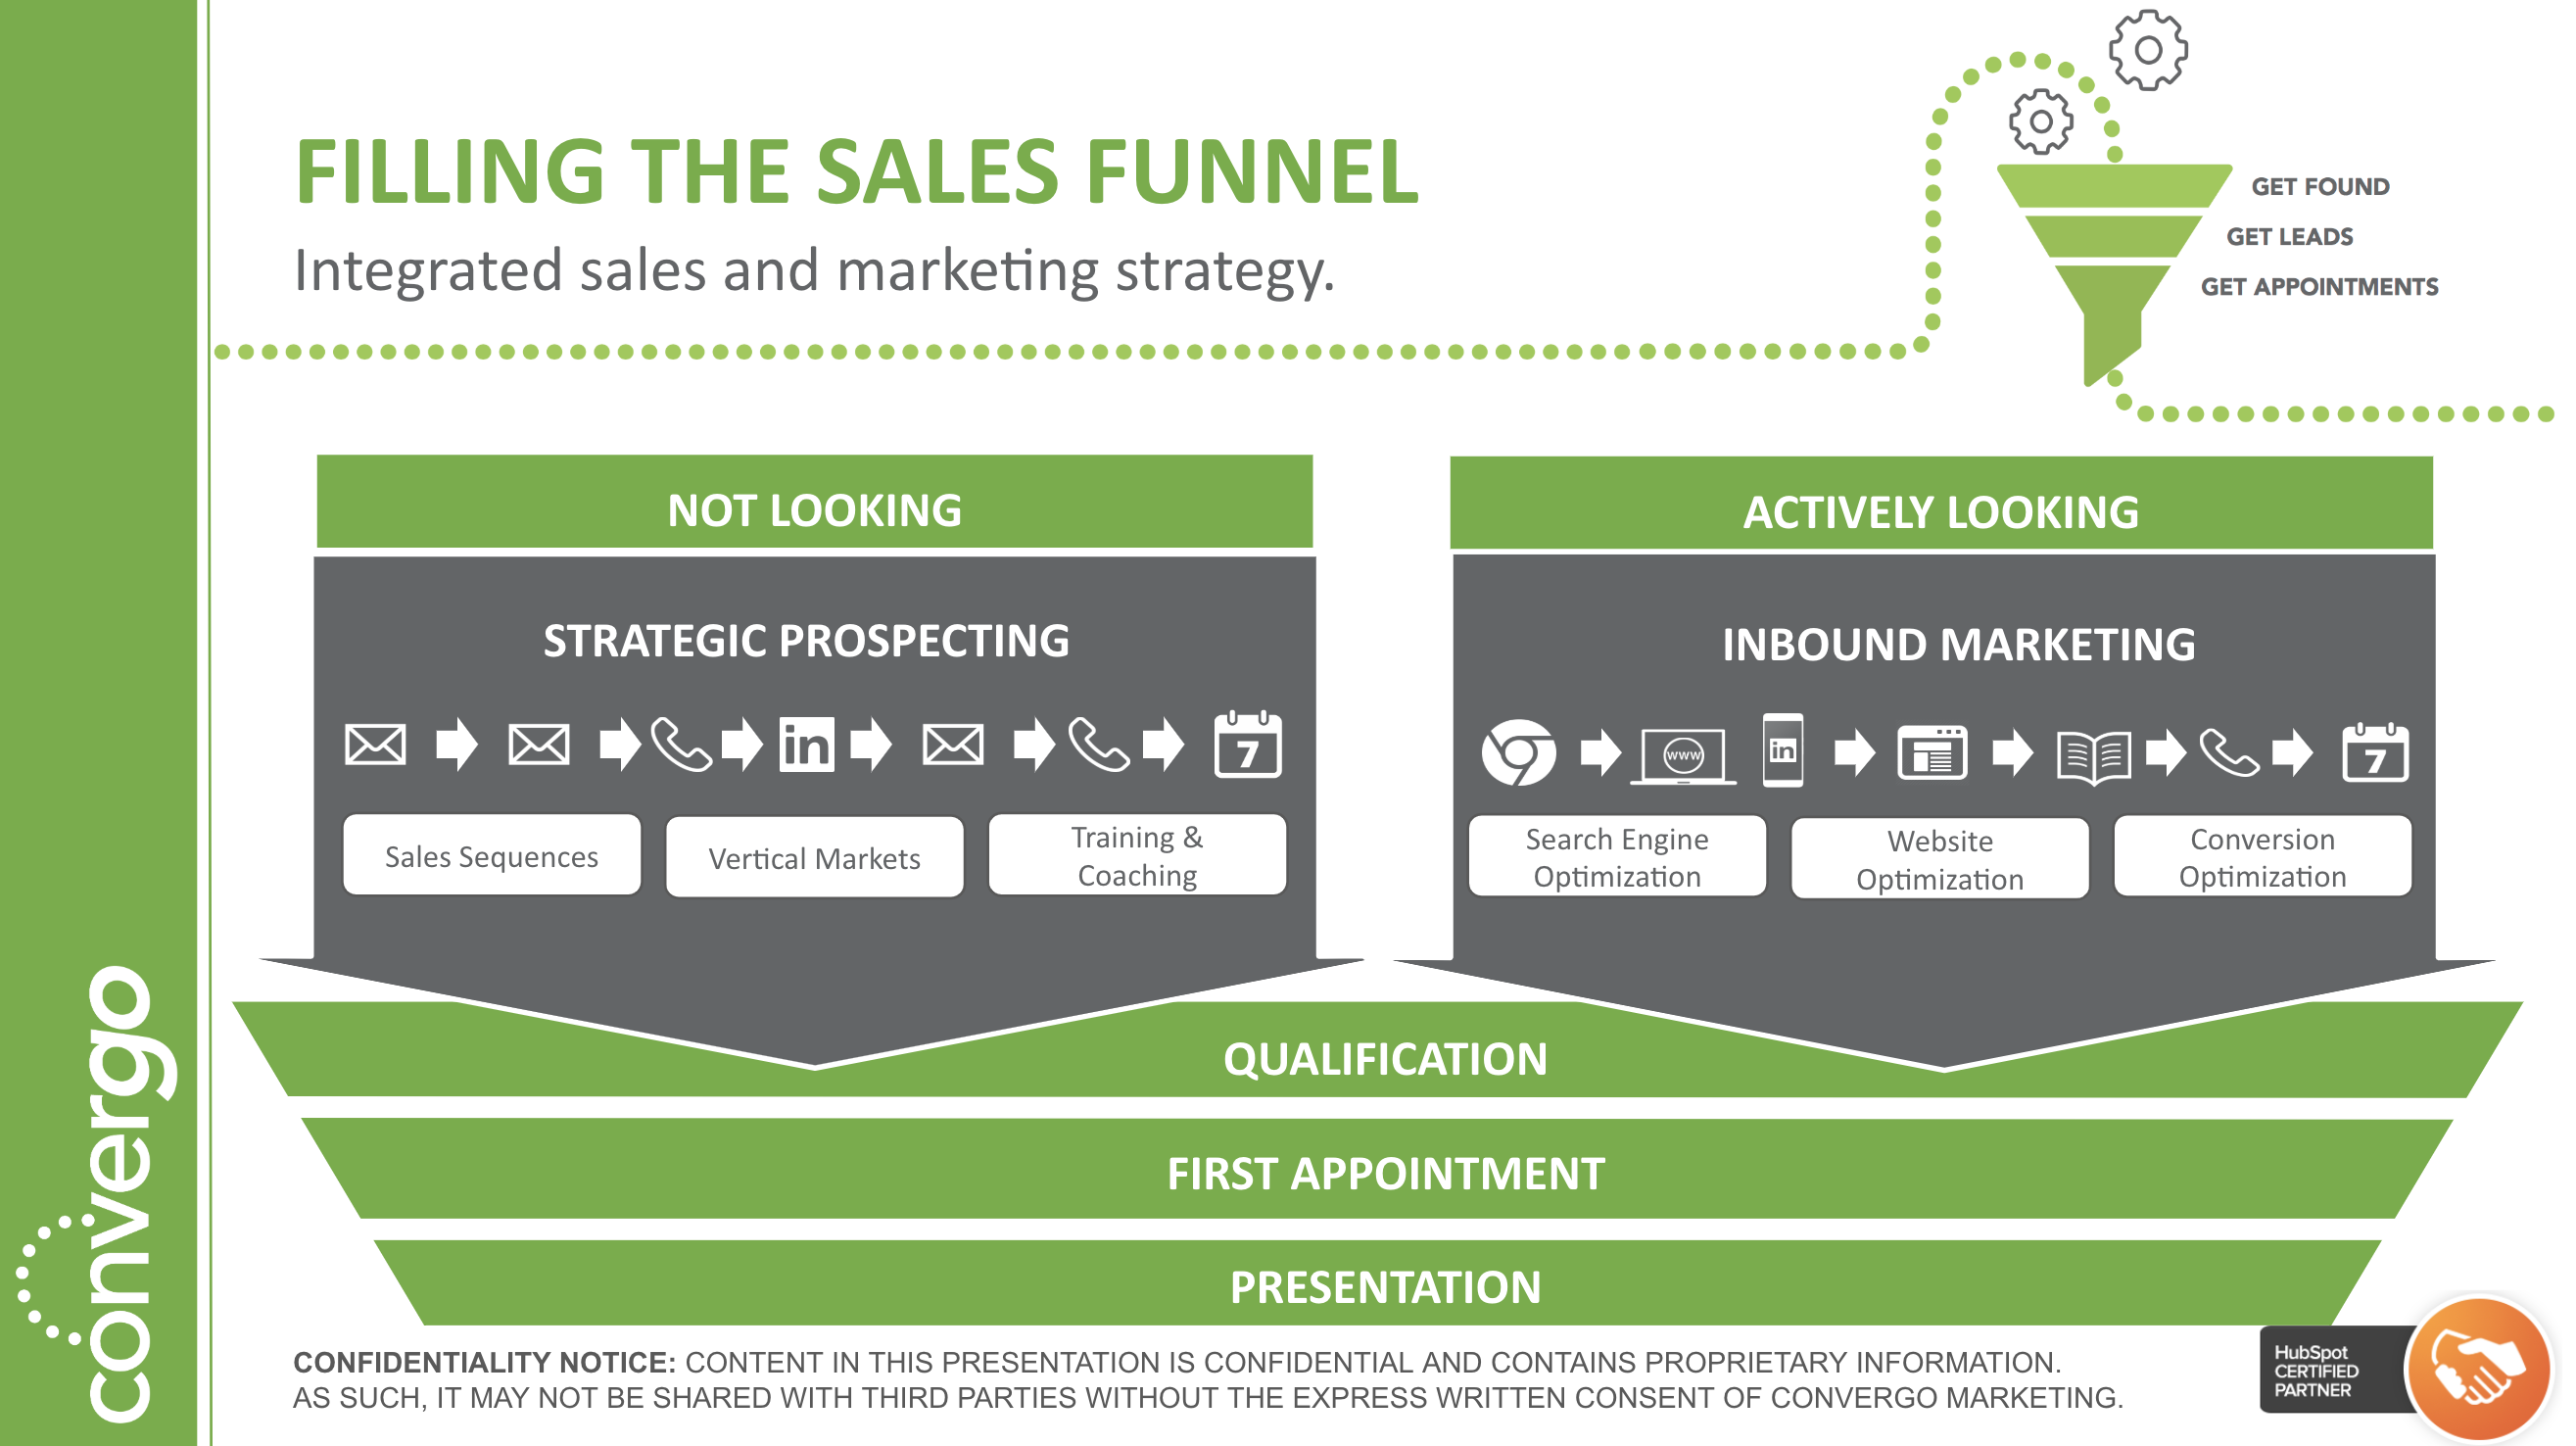 Fill your sales funnel with integrated sales and marketing strategies.